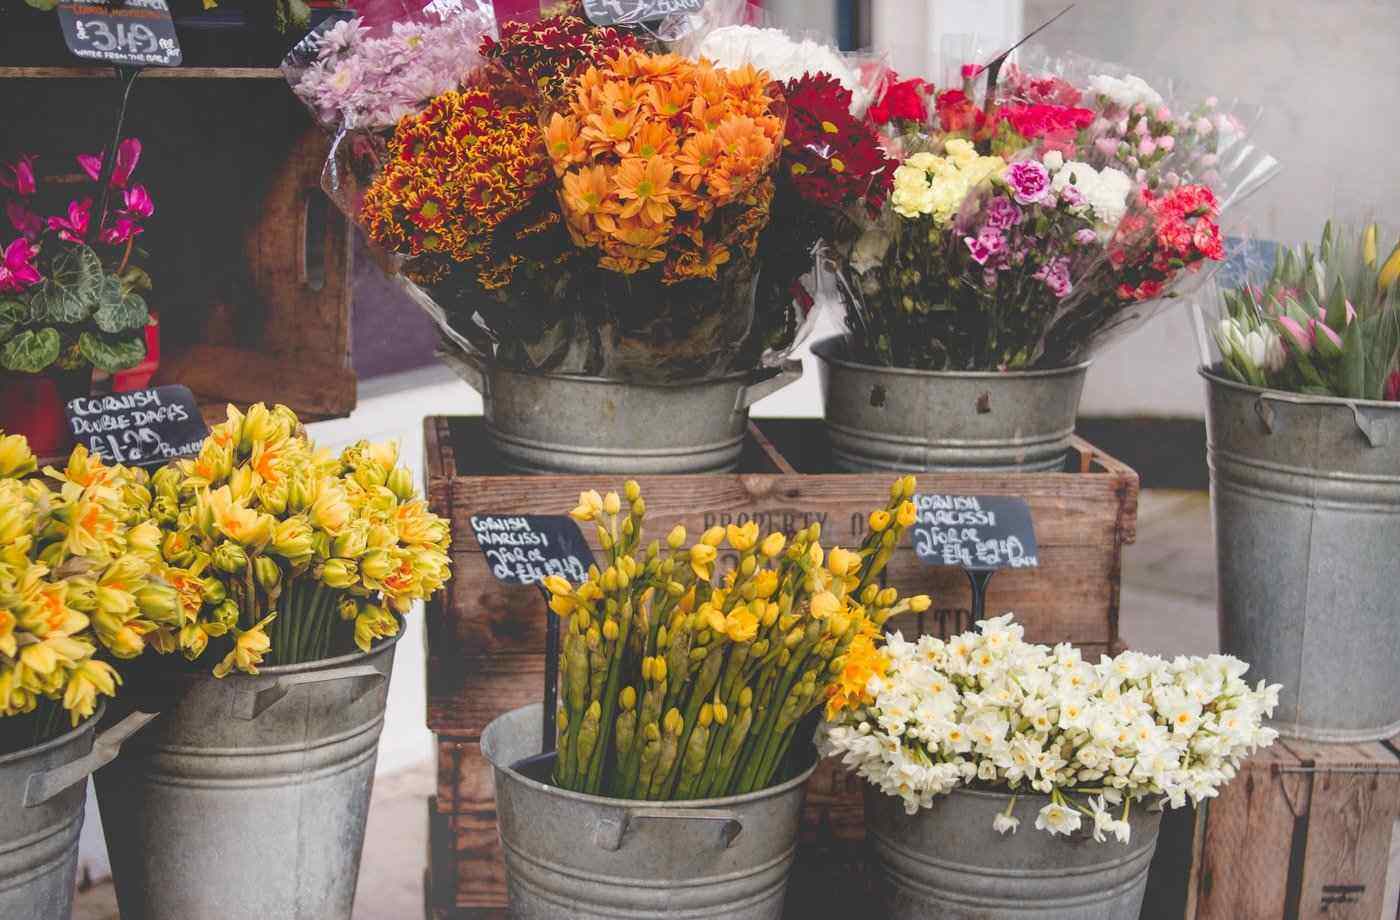 flowers in buckets at florist's shop - how to get the best value from your florist